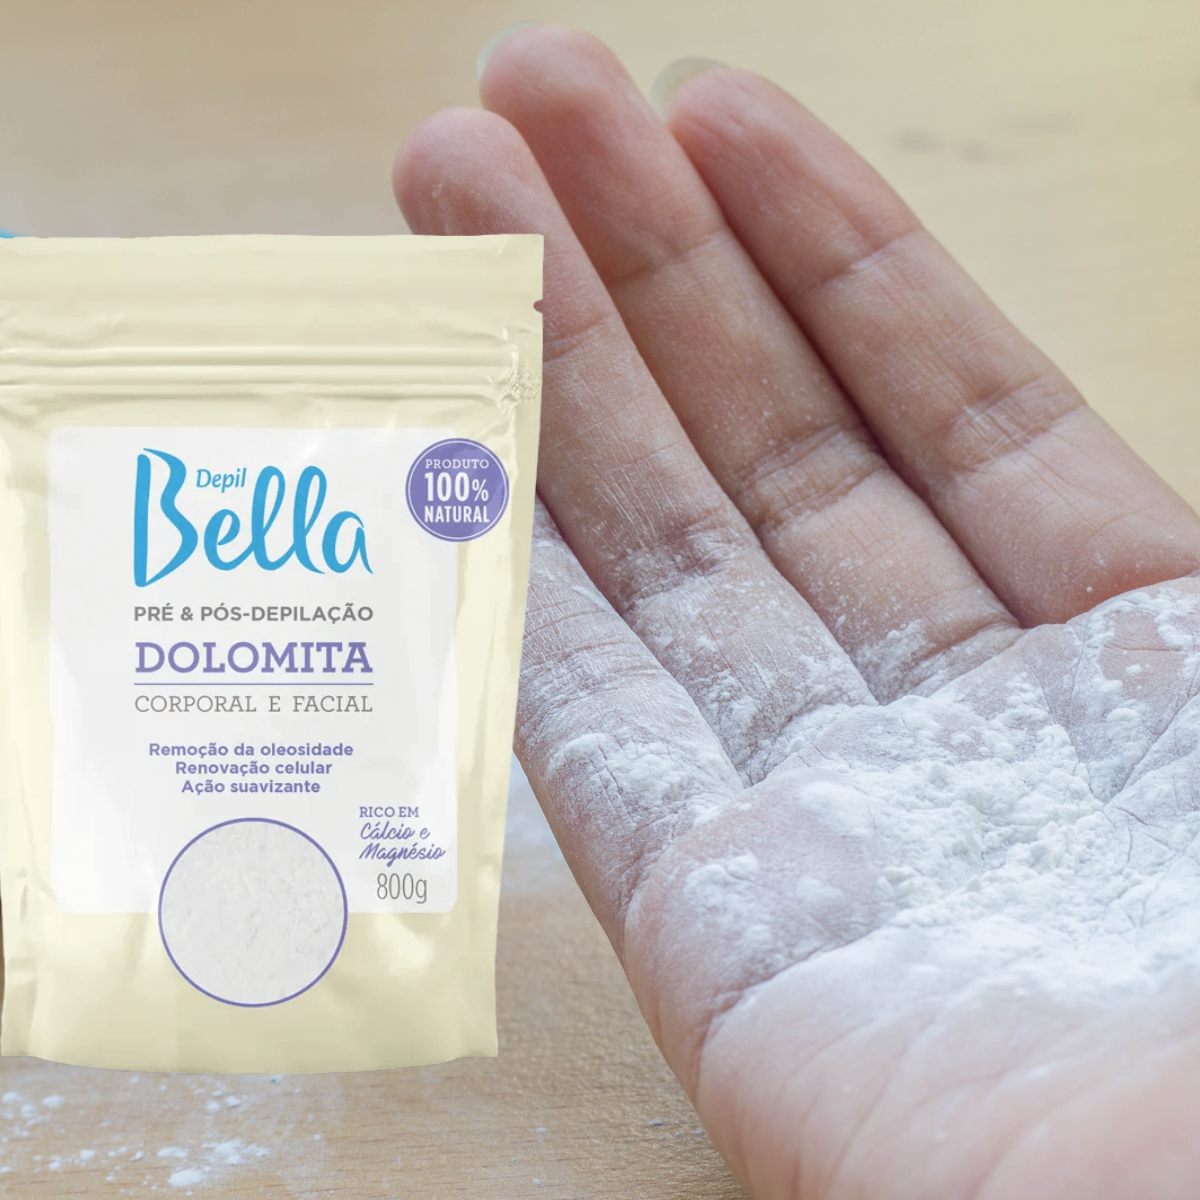 Depil Bella dolomite powder in hand for pre and post waxing